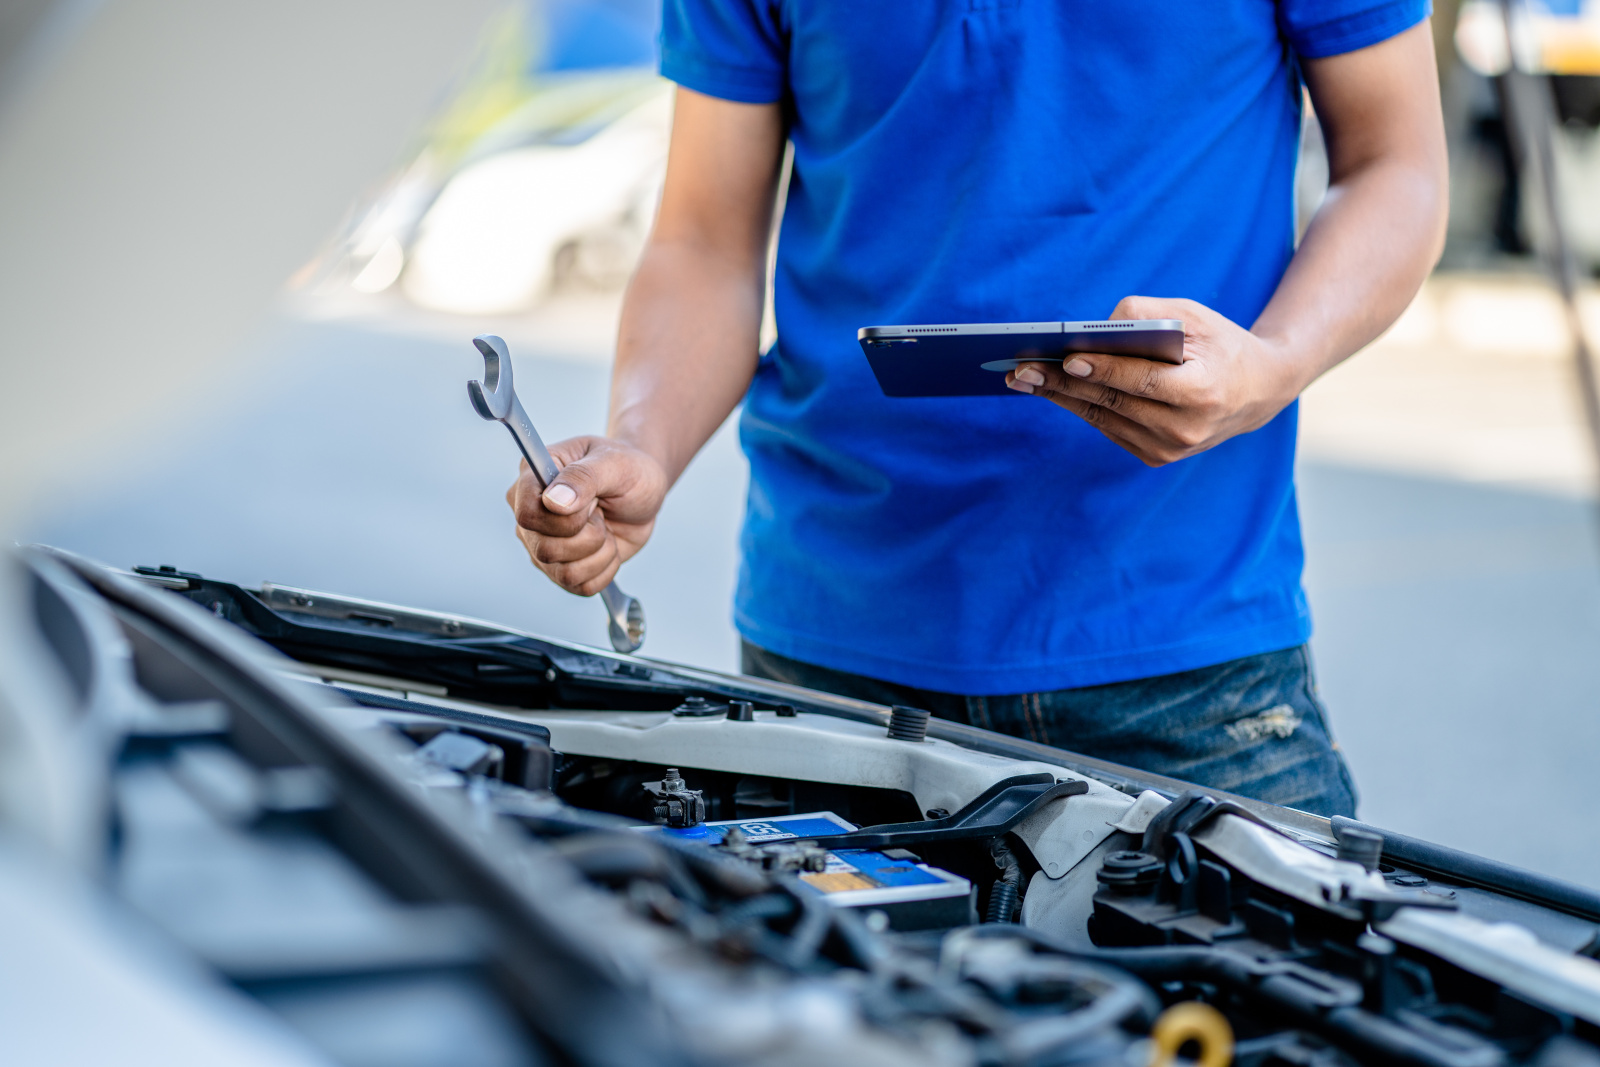 Vehicle engine safety inspection with the NestForms app